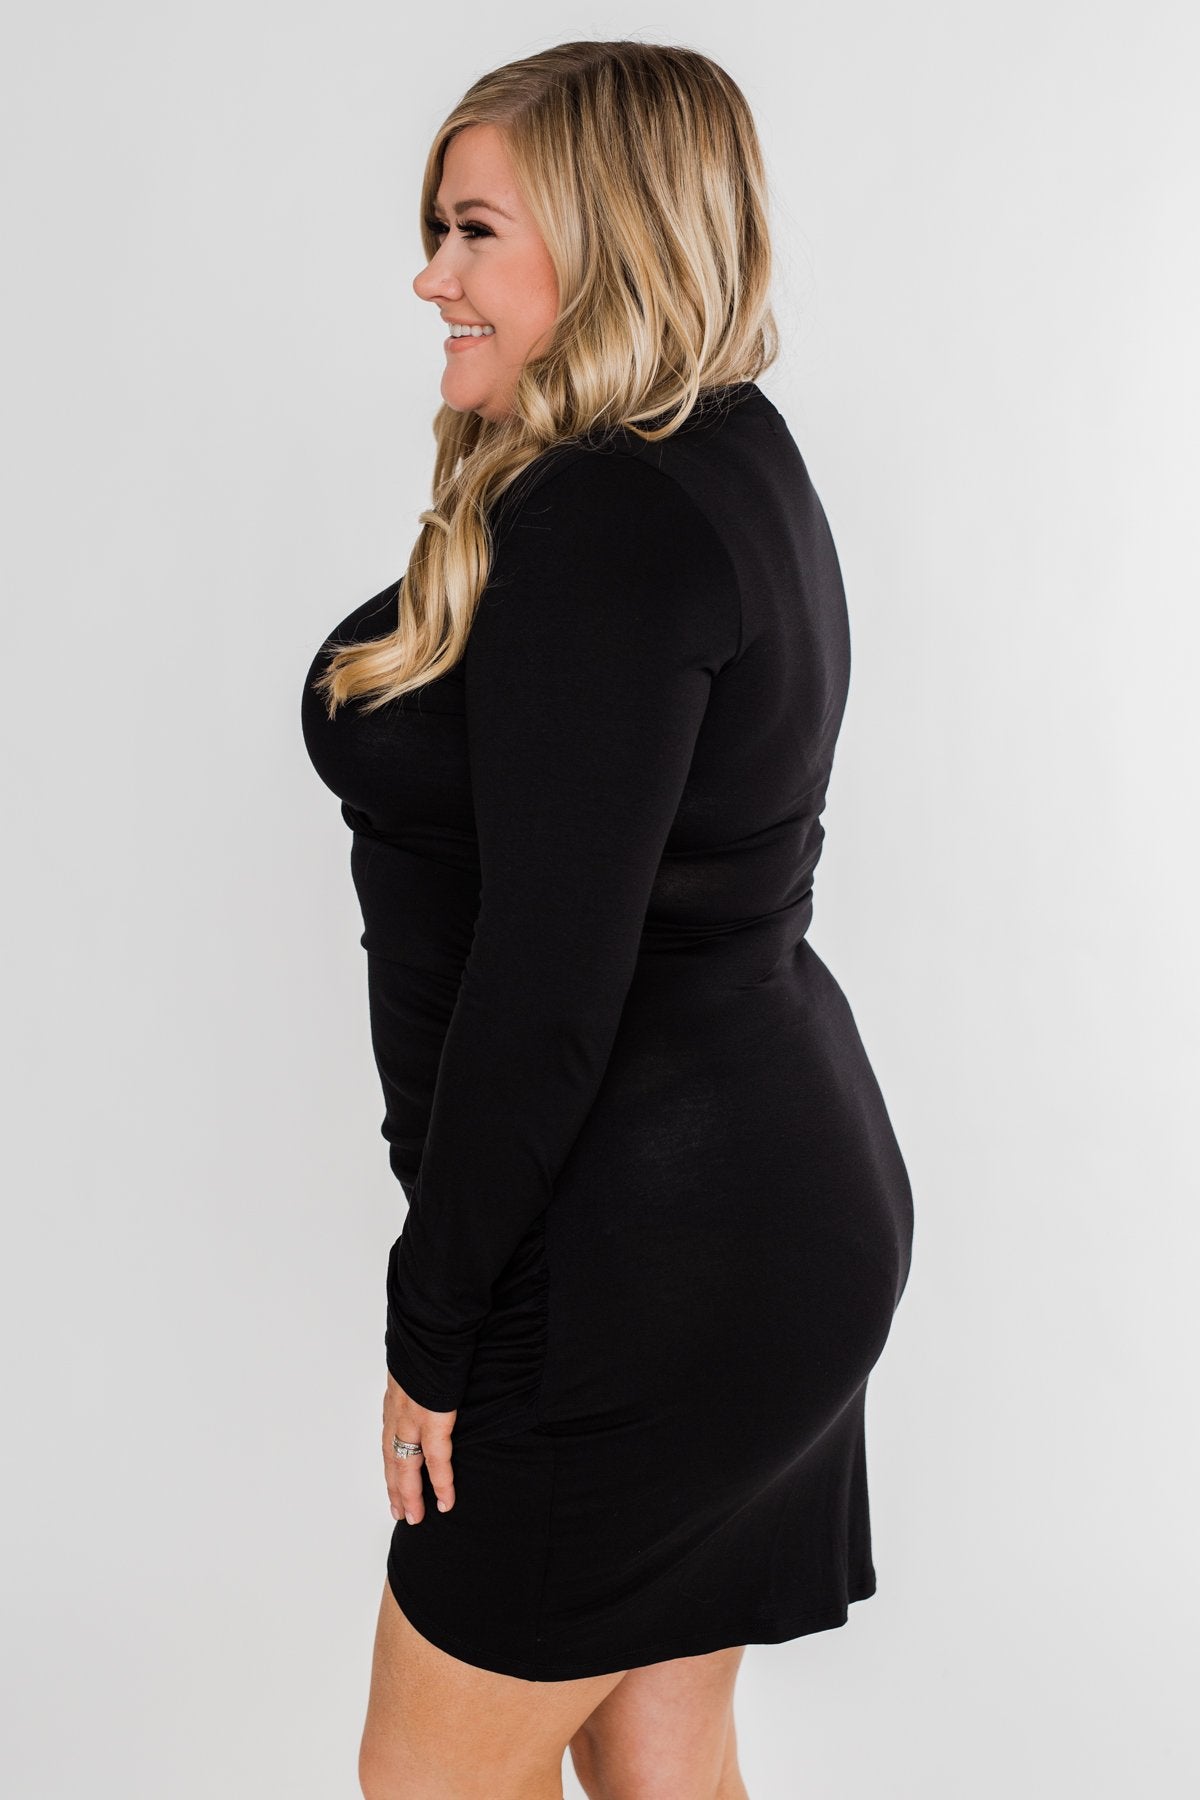 Truly Elegant Long Sleeve Fitted Dress- Black